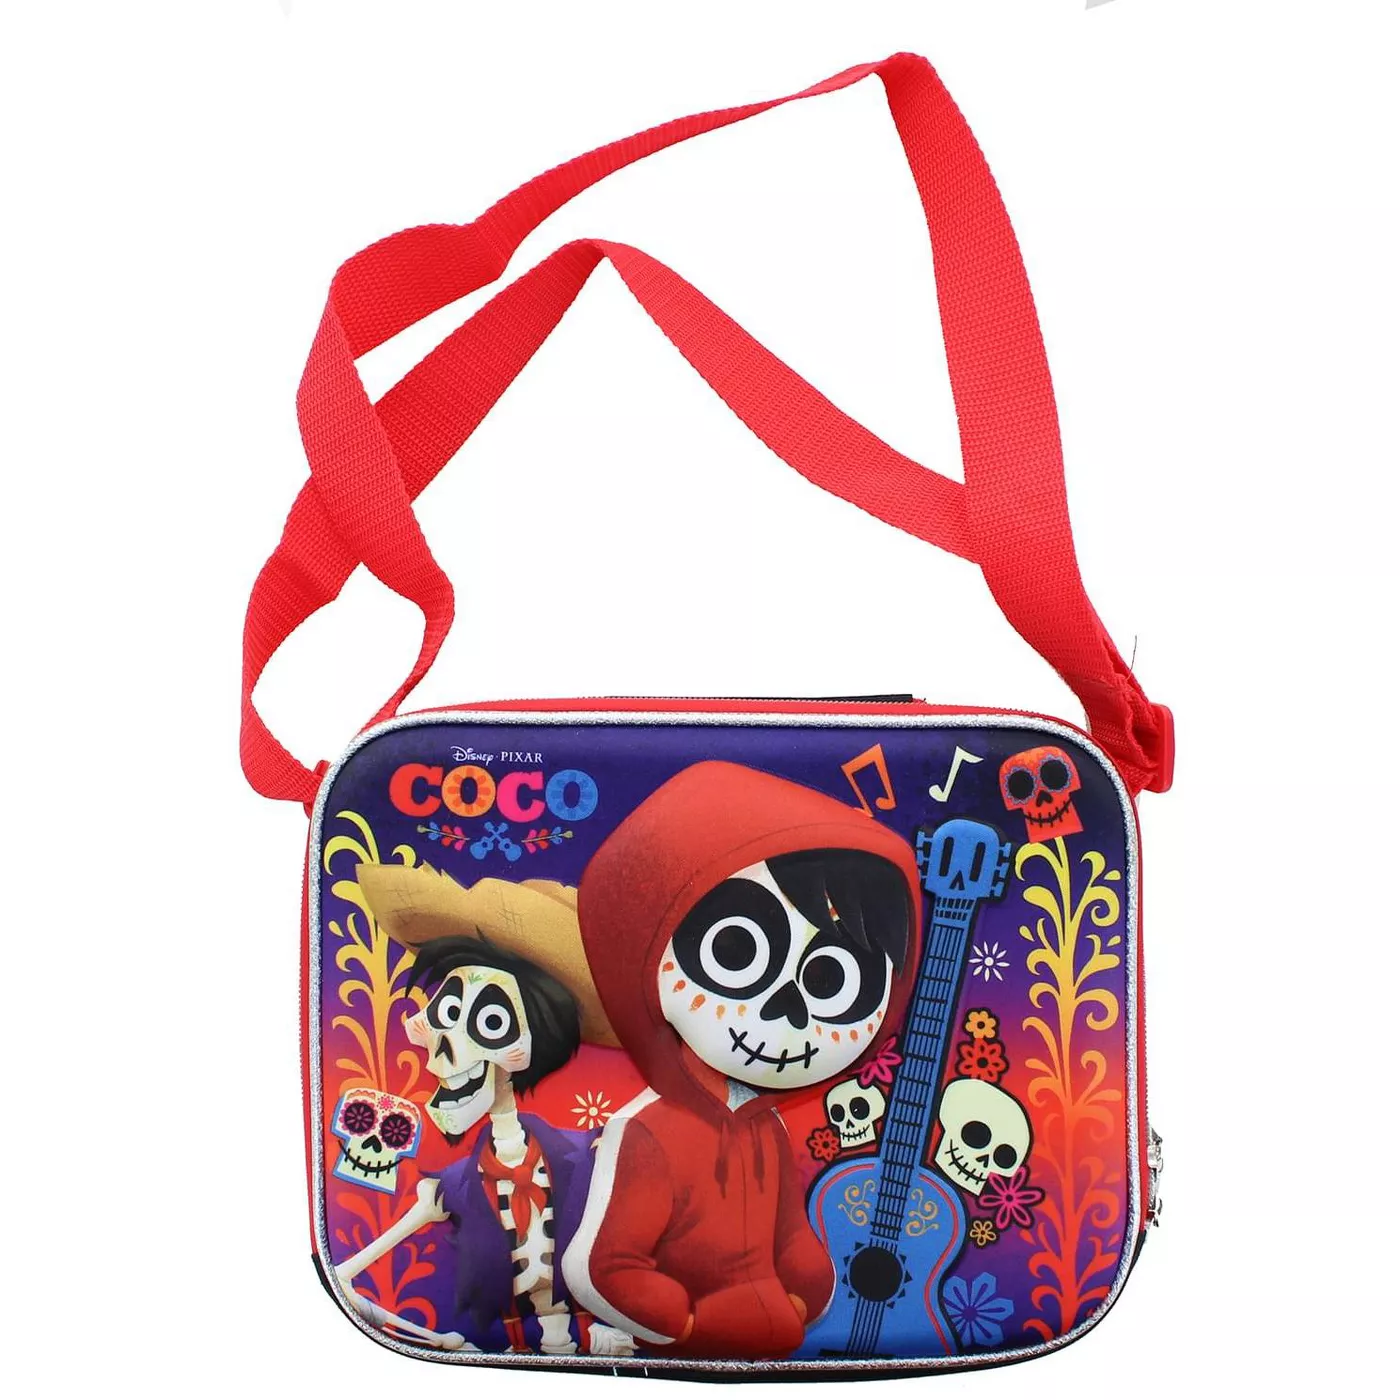 Disney Pixar COCO Lunch Tote With Long Strap.